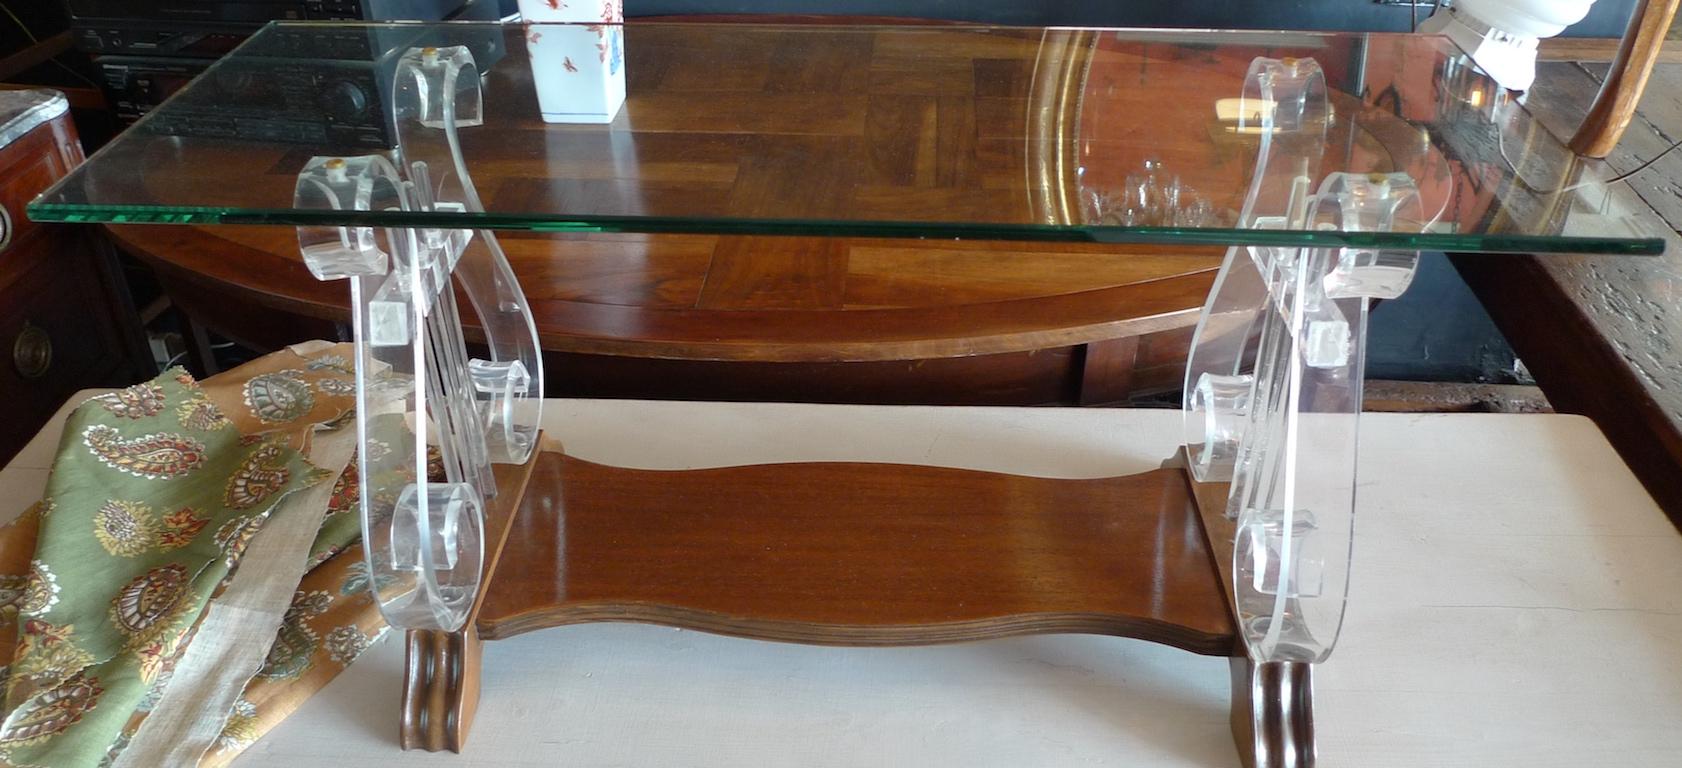 American 1970s glass top coffee table with lucite supports and walnut shelf.
 